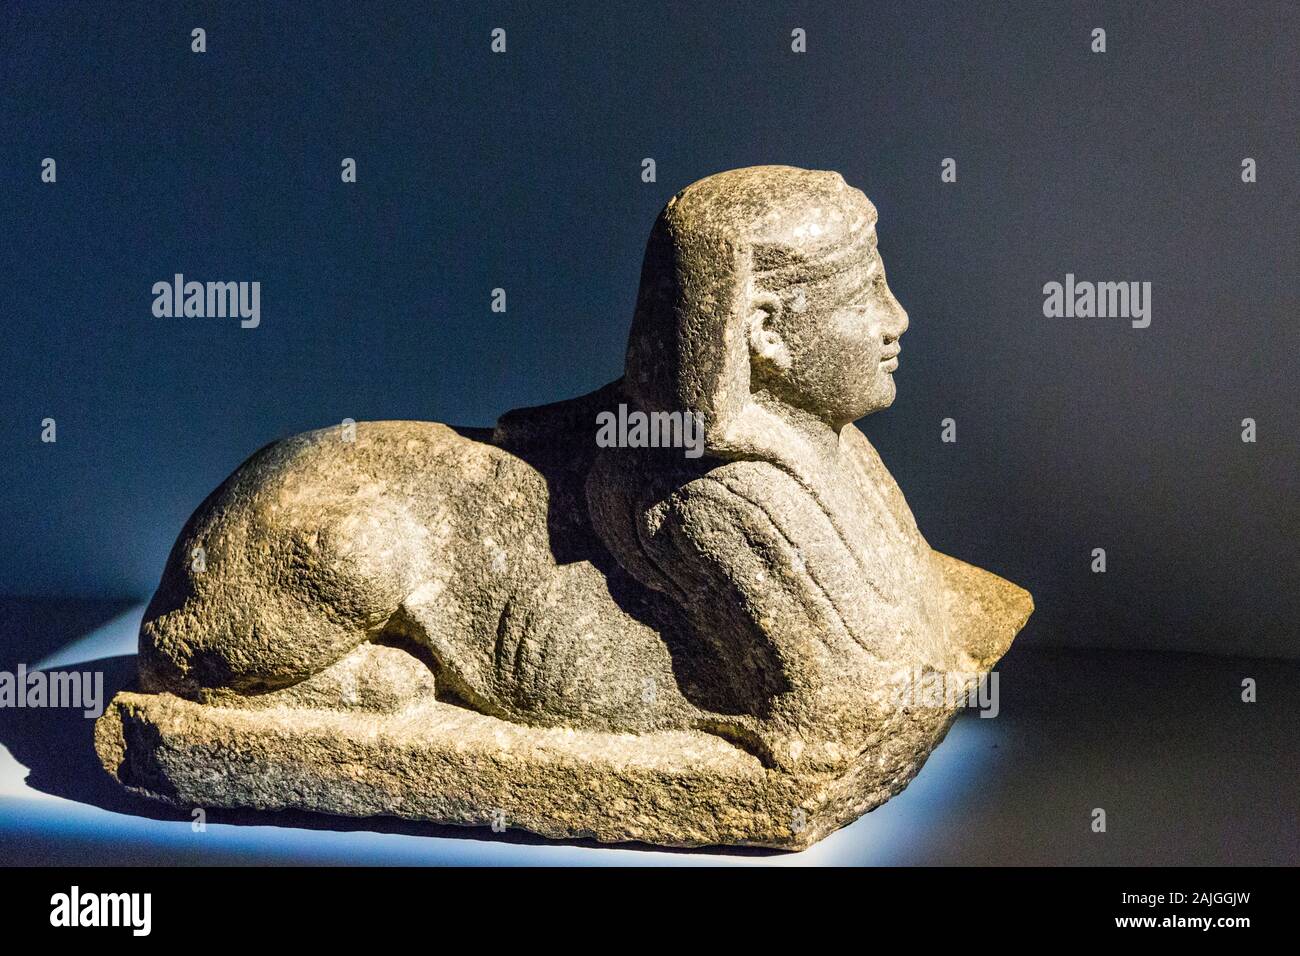 Photo taken during the opening visit of the exhibition “Osiris, Egypt's Sunken Mysteries”. Egypt, Alexandria, National Museum, a ptolemaic sphinx. Stock Photo